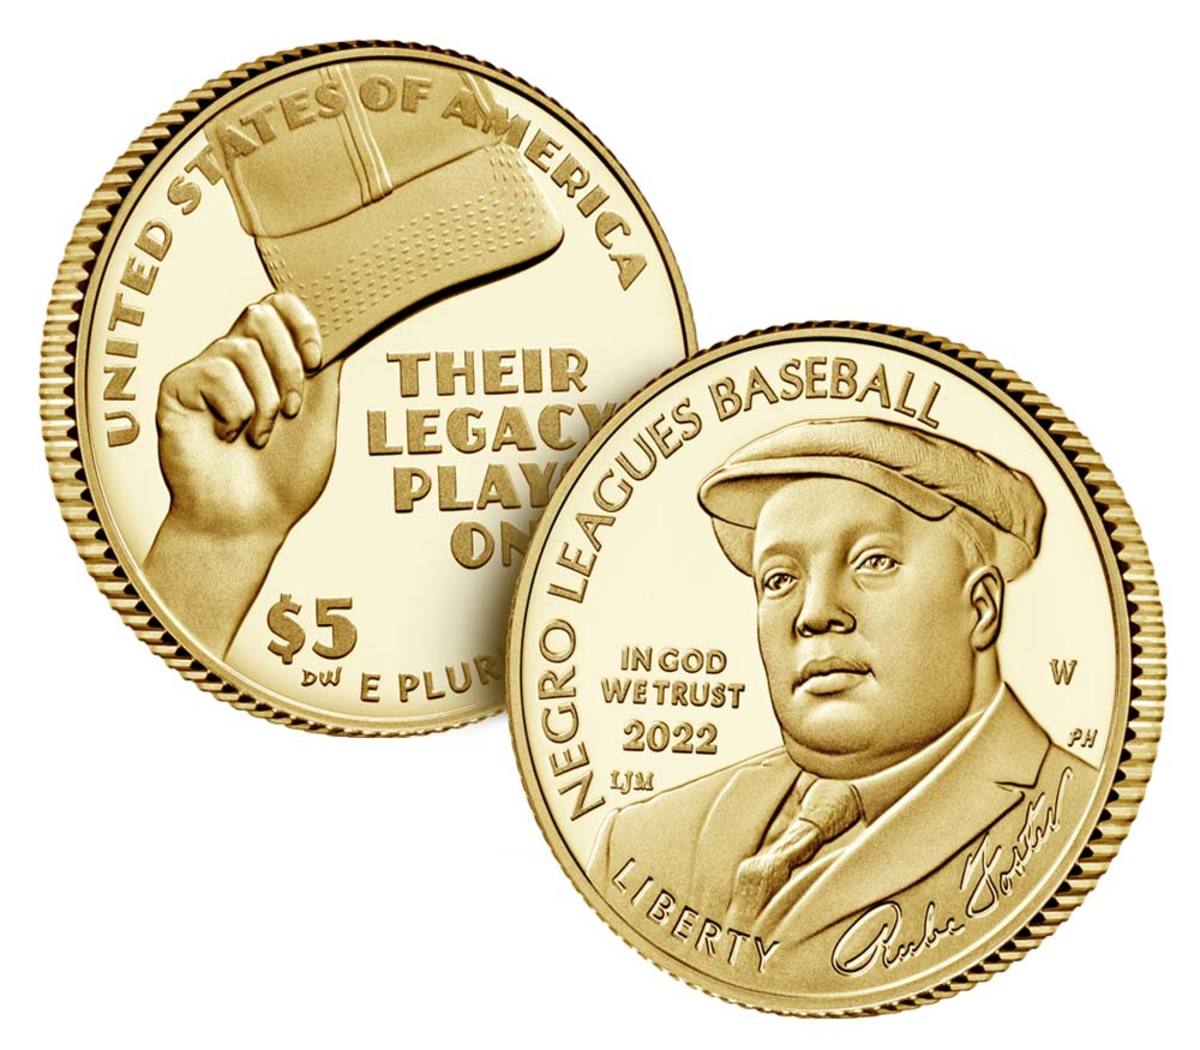 Negro Leagues Baseball $5 gold proof coin.